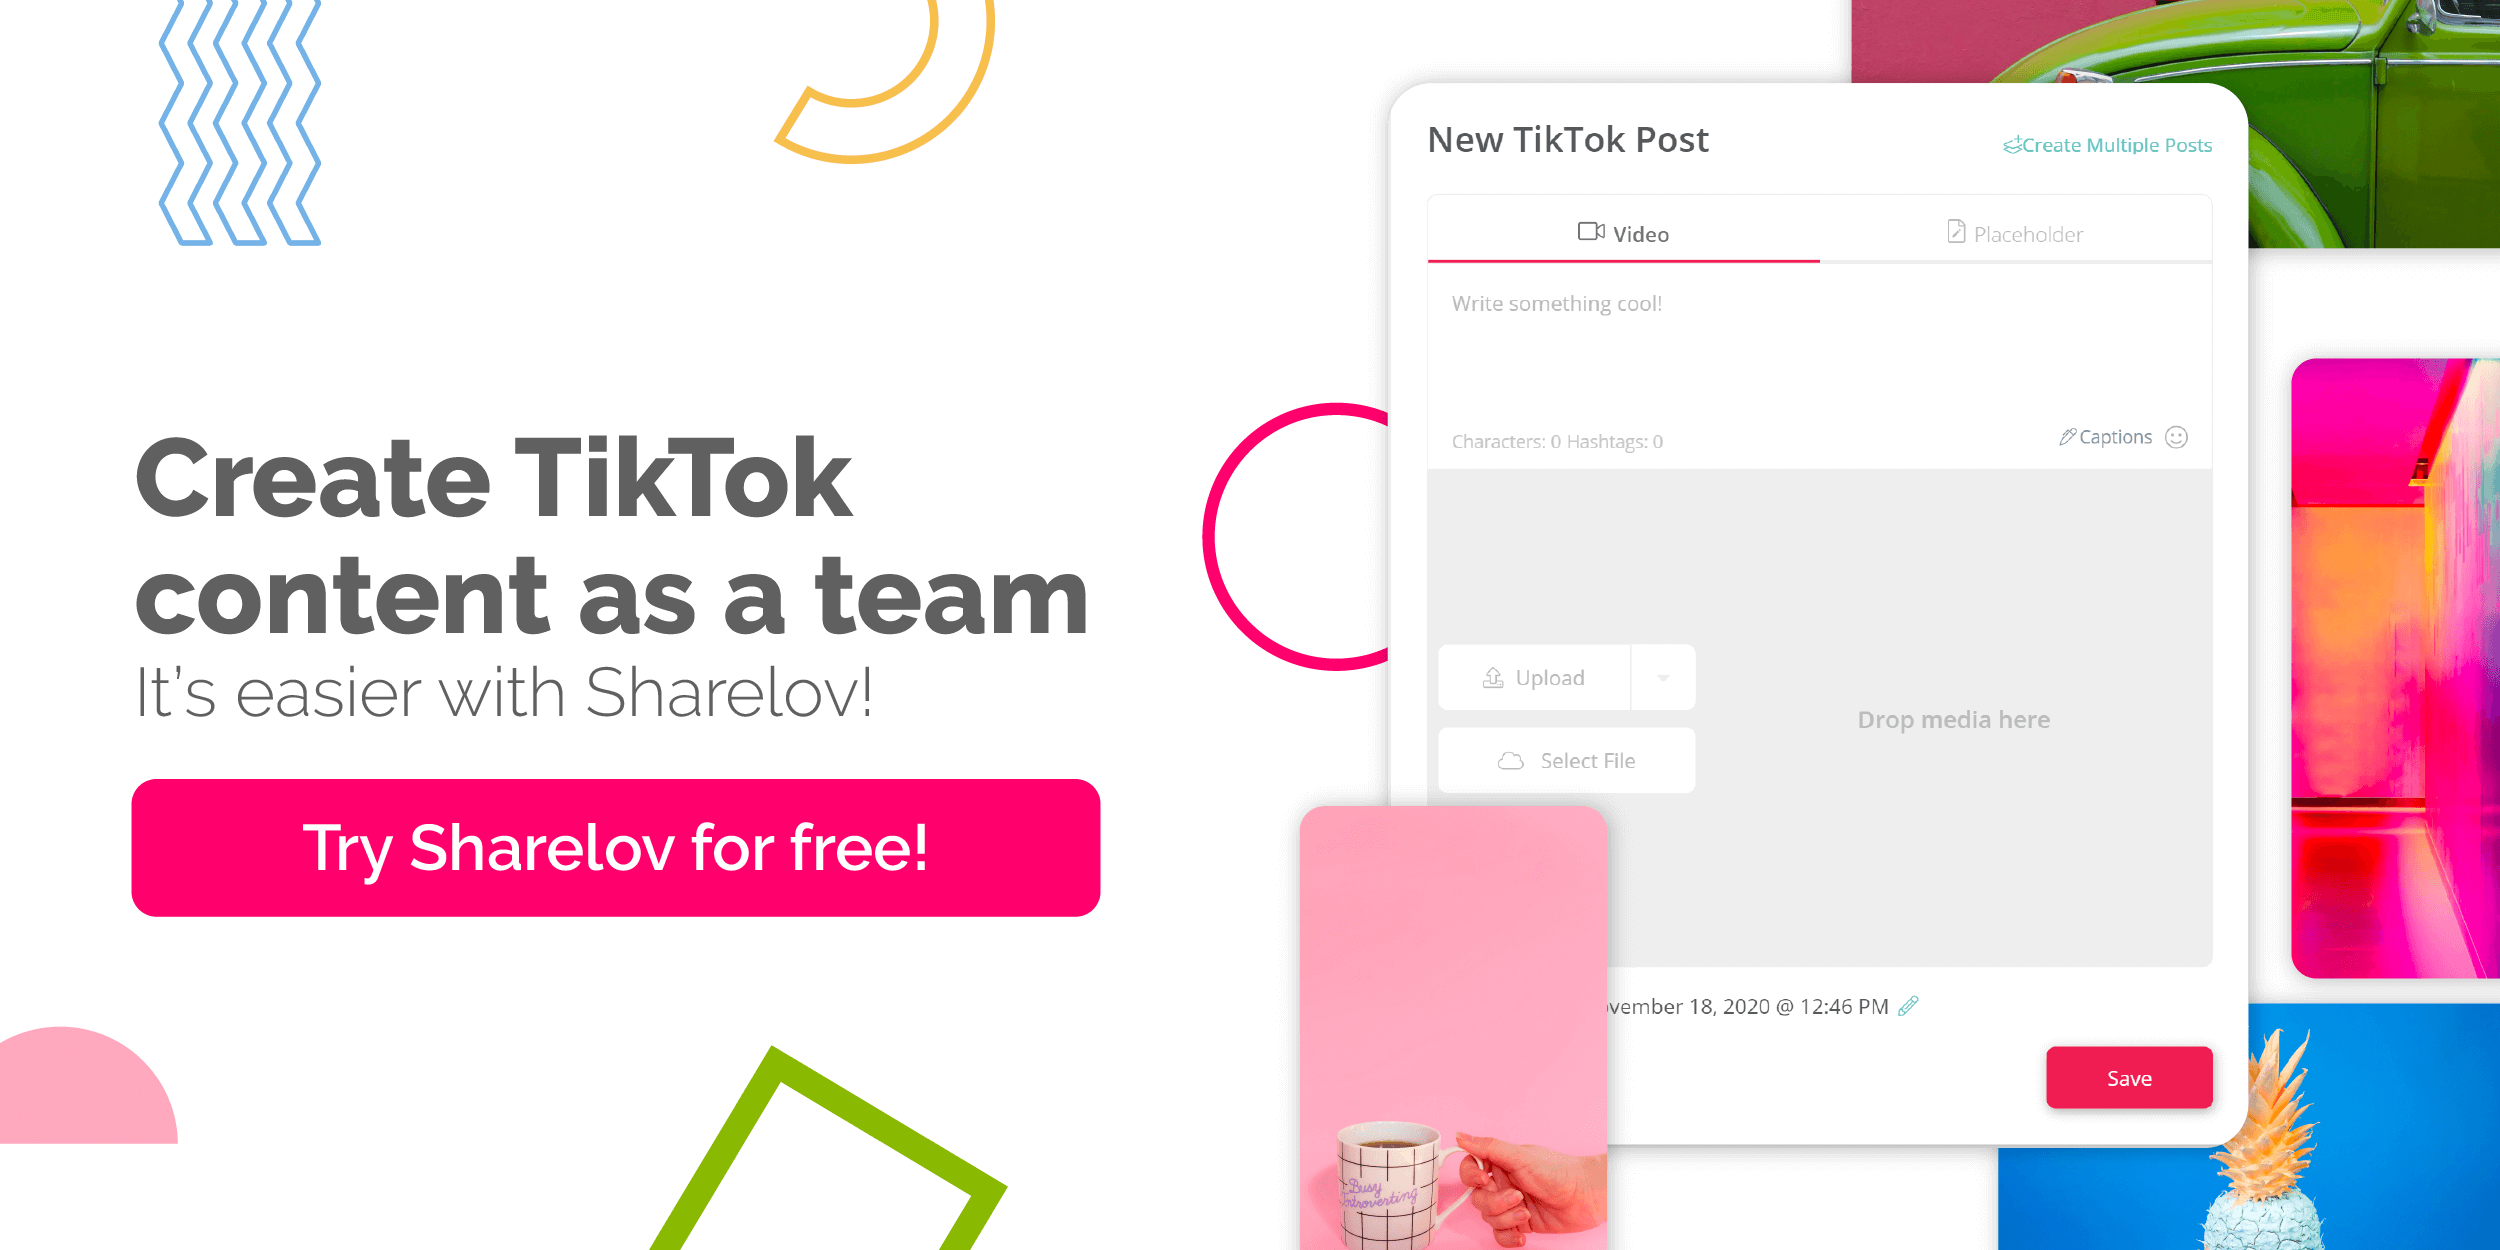 Create TikTok content as a team It’s easier with Sharelov